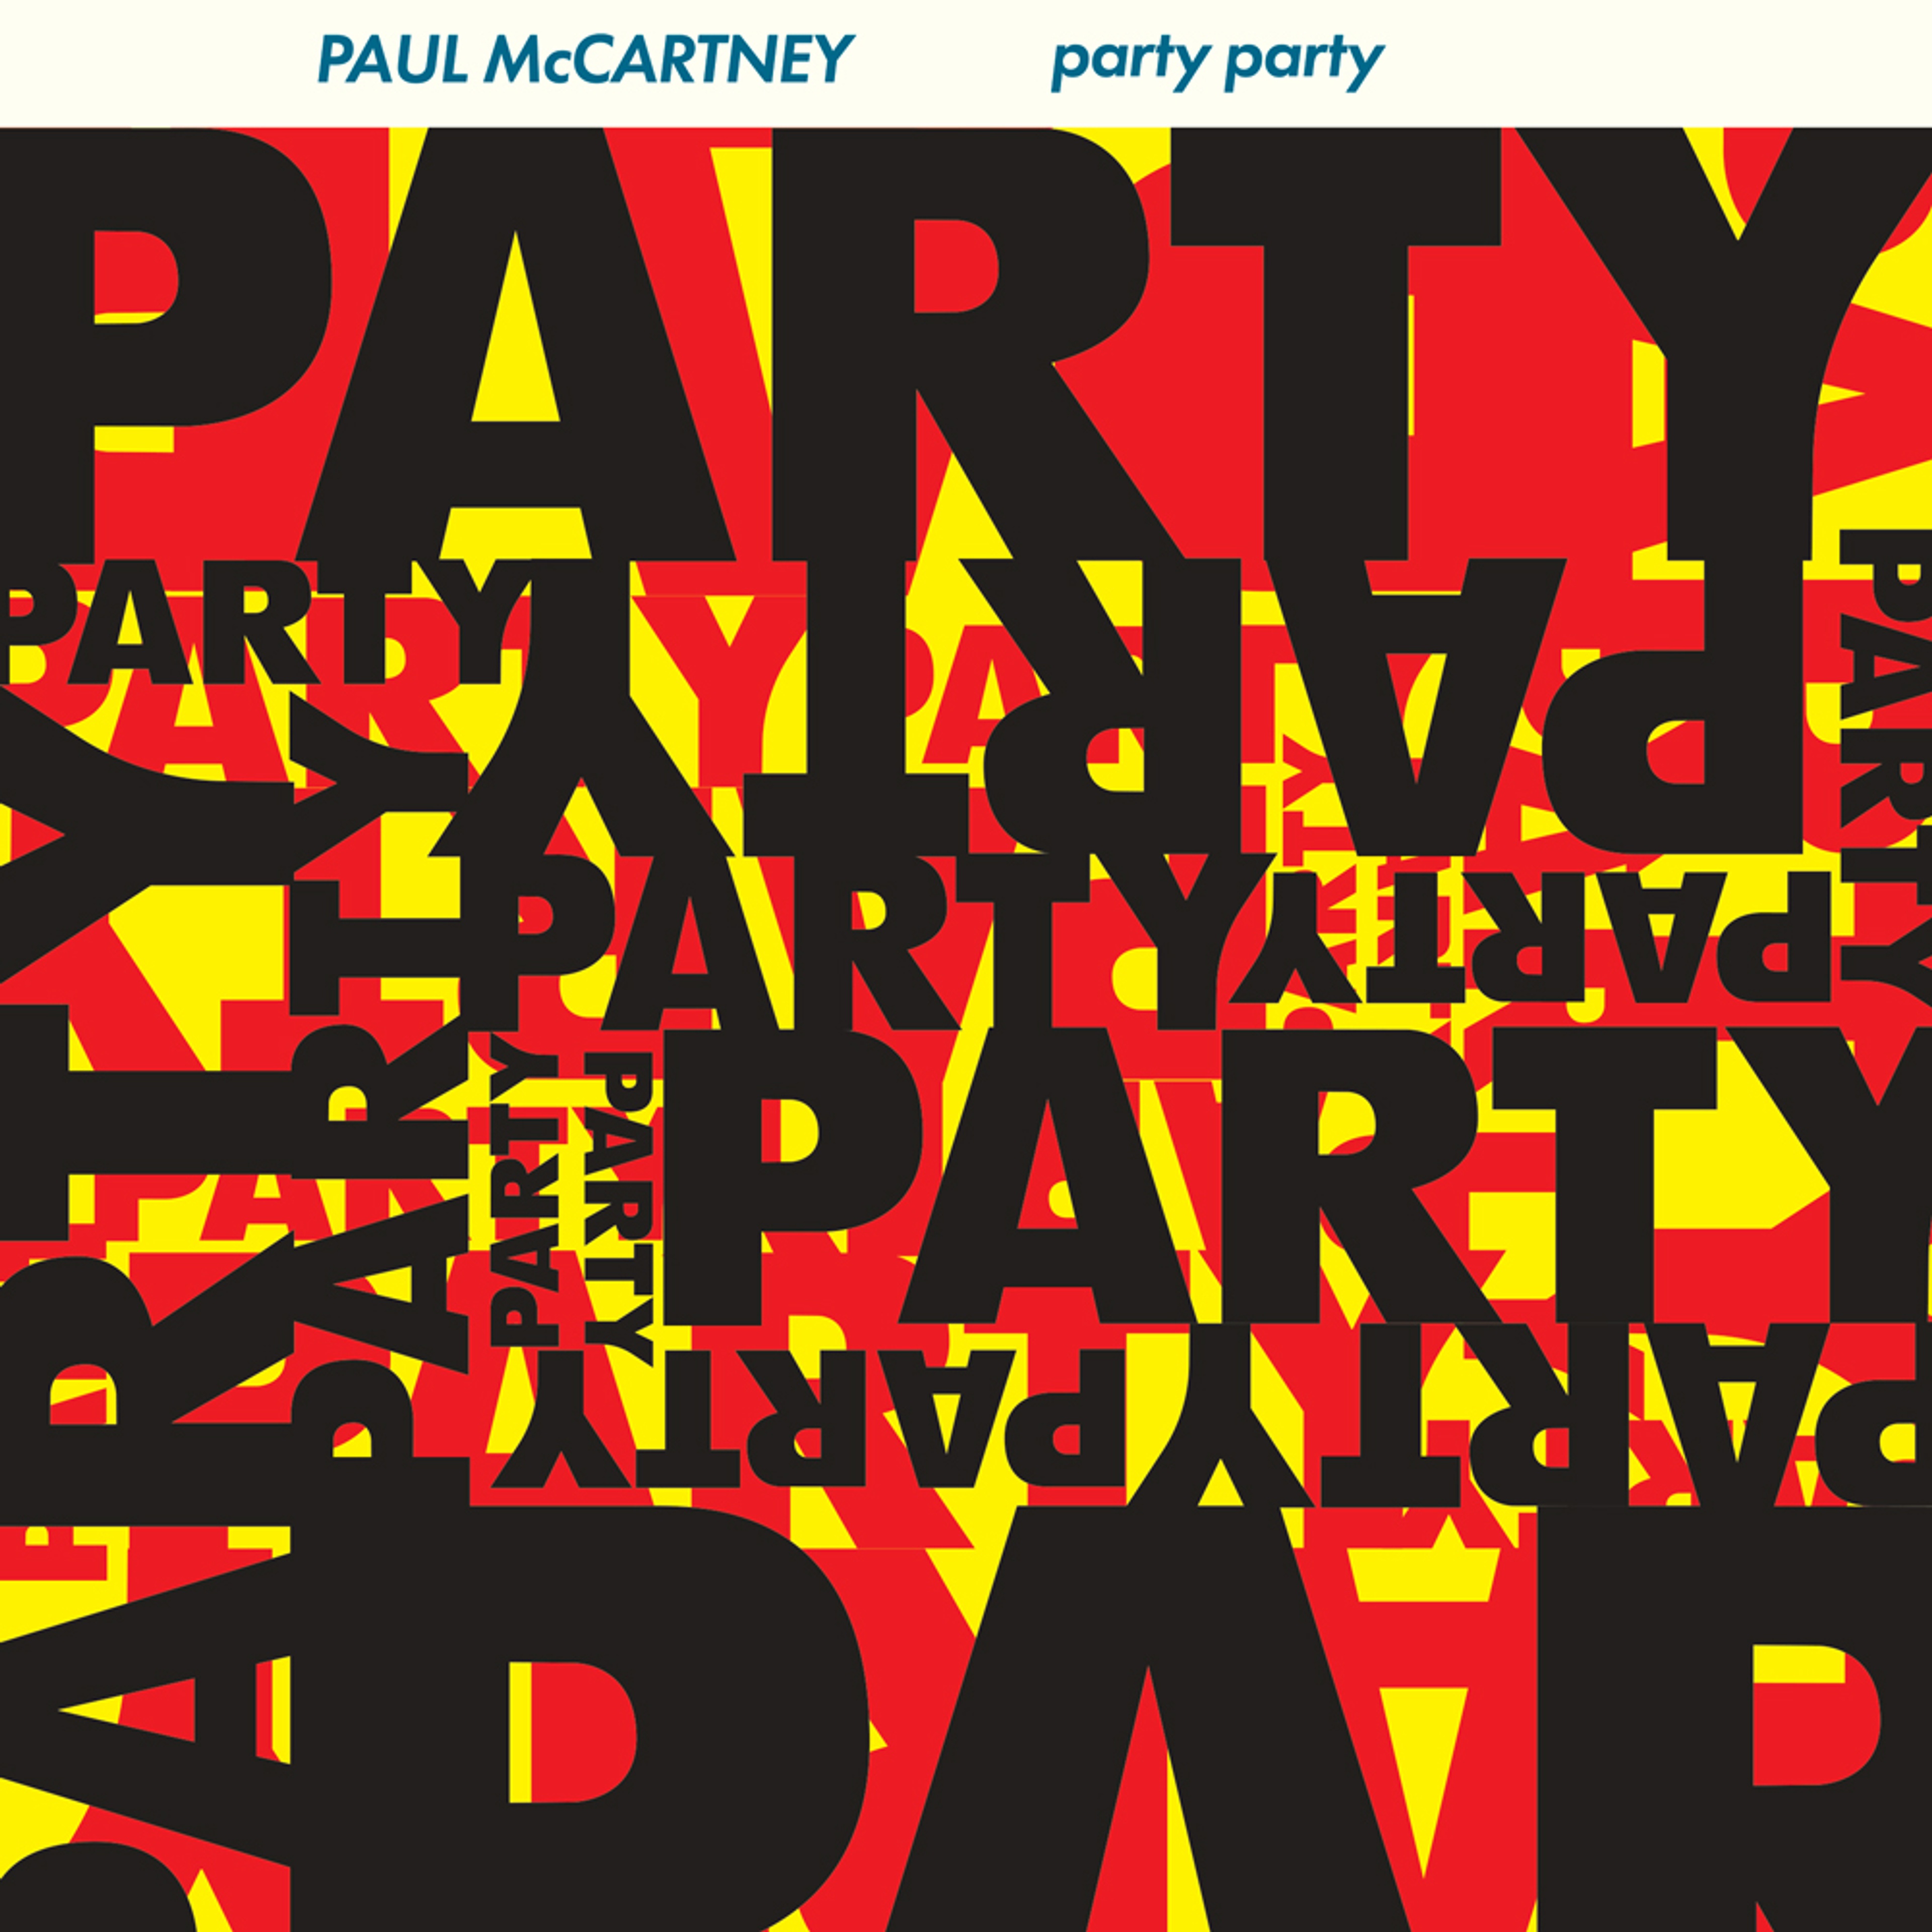 “Party Party” Single artwork as featured in 'The 7" Singles Box'